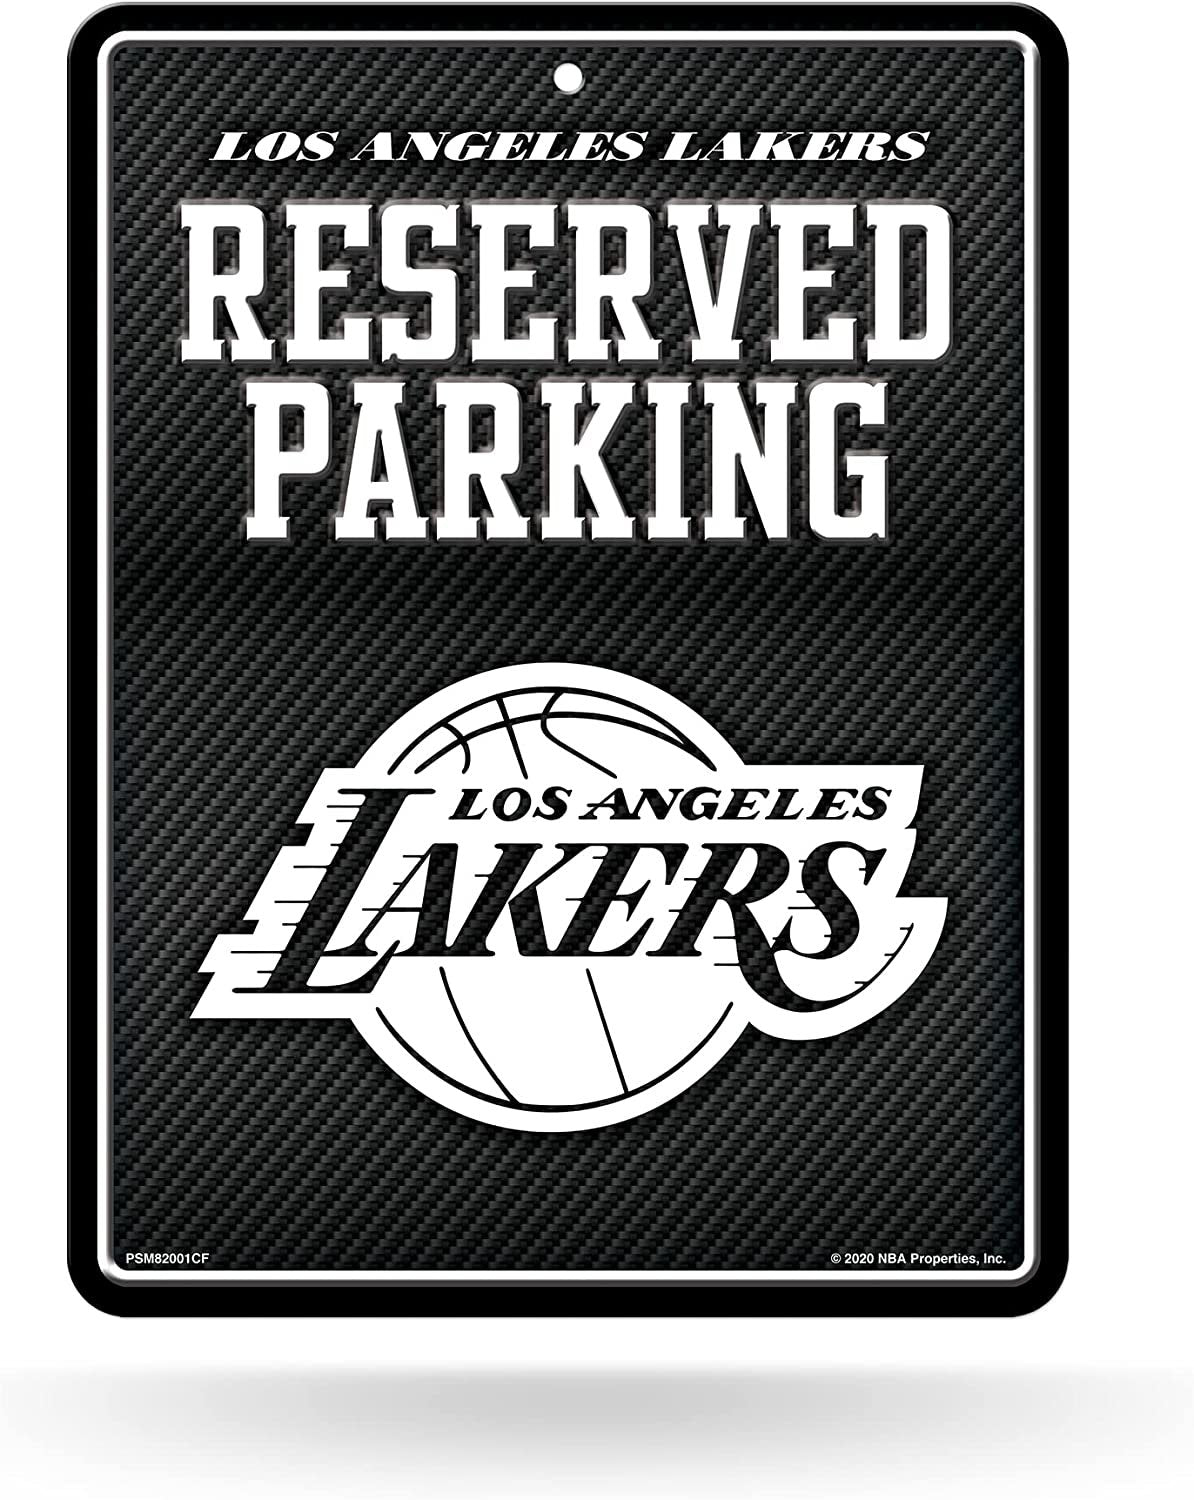 Los Angeles Lakers Metal Parking Novelty Wall Sign 8.5 x 11 Inch Carbon Fiber Design